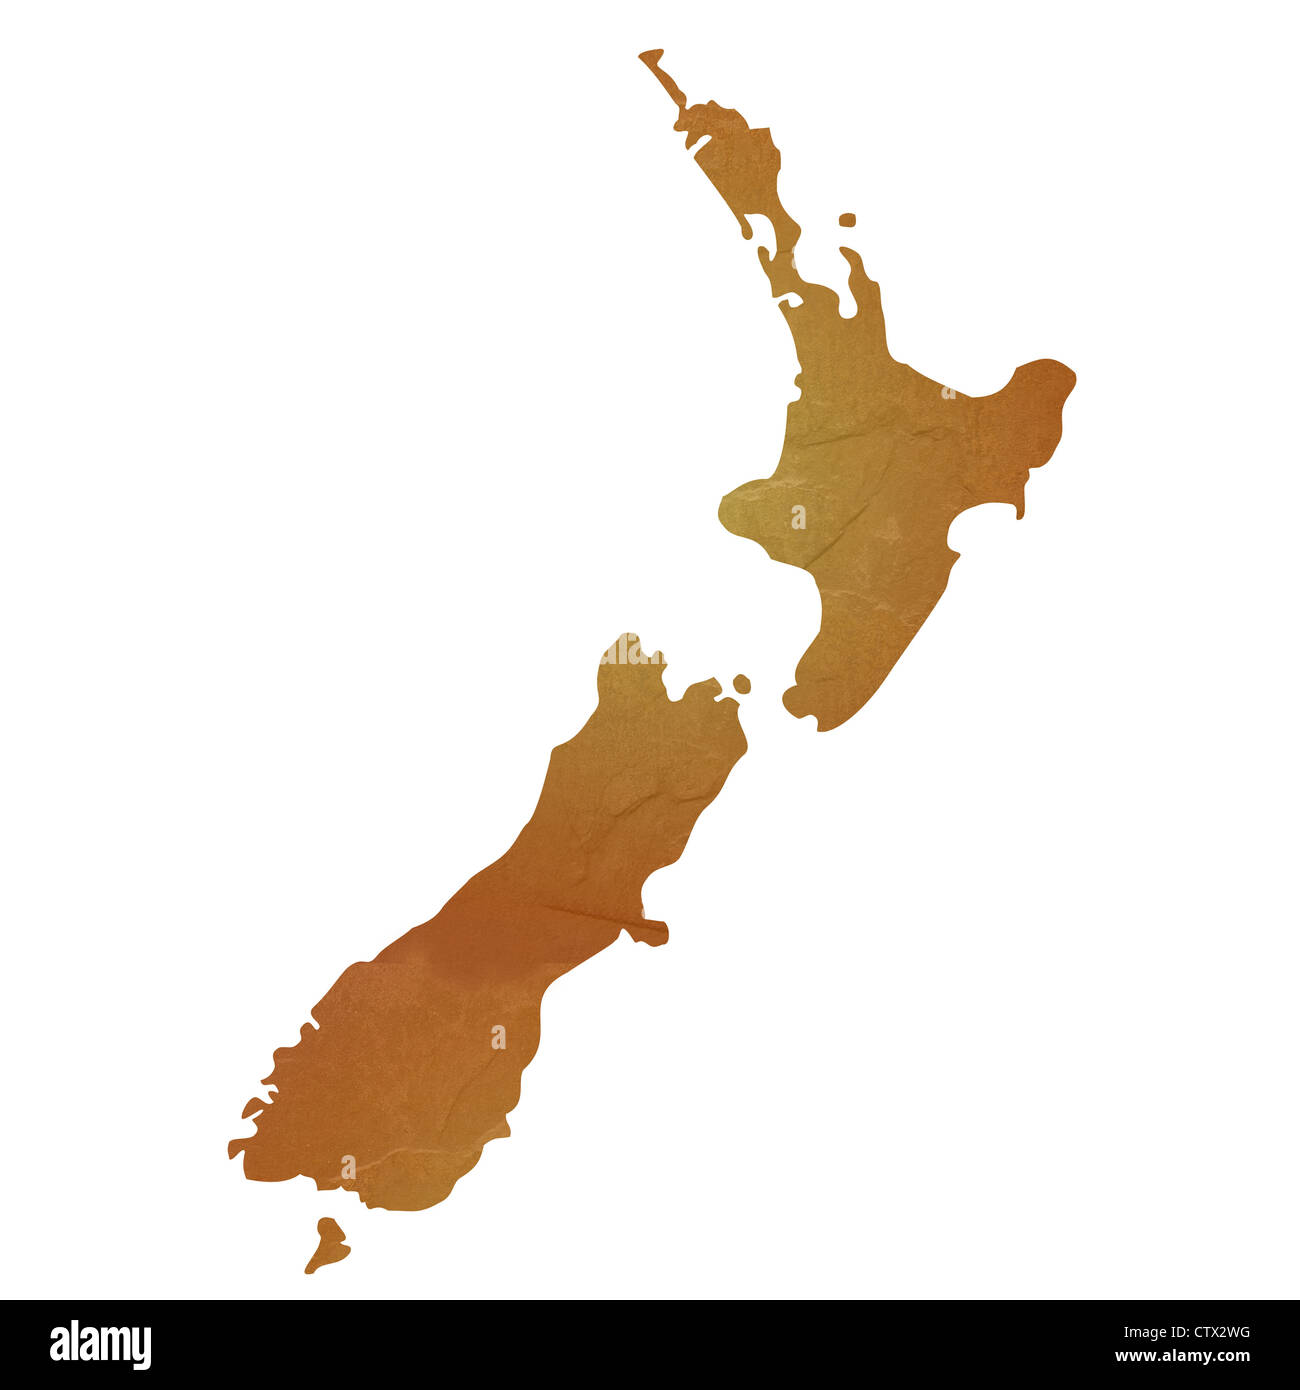 New Zealand map with brown rock or stone texture, isolated on white background with clipping path. Stock Photo